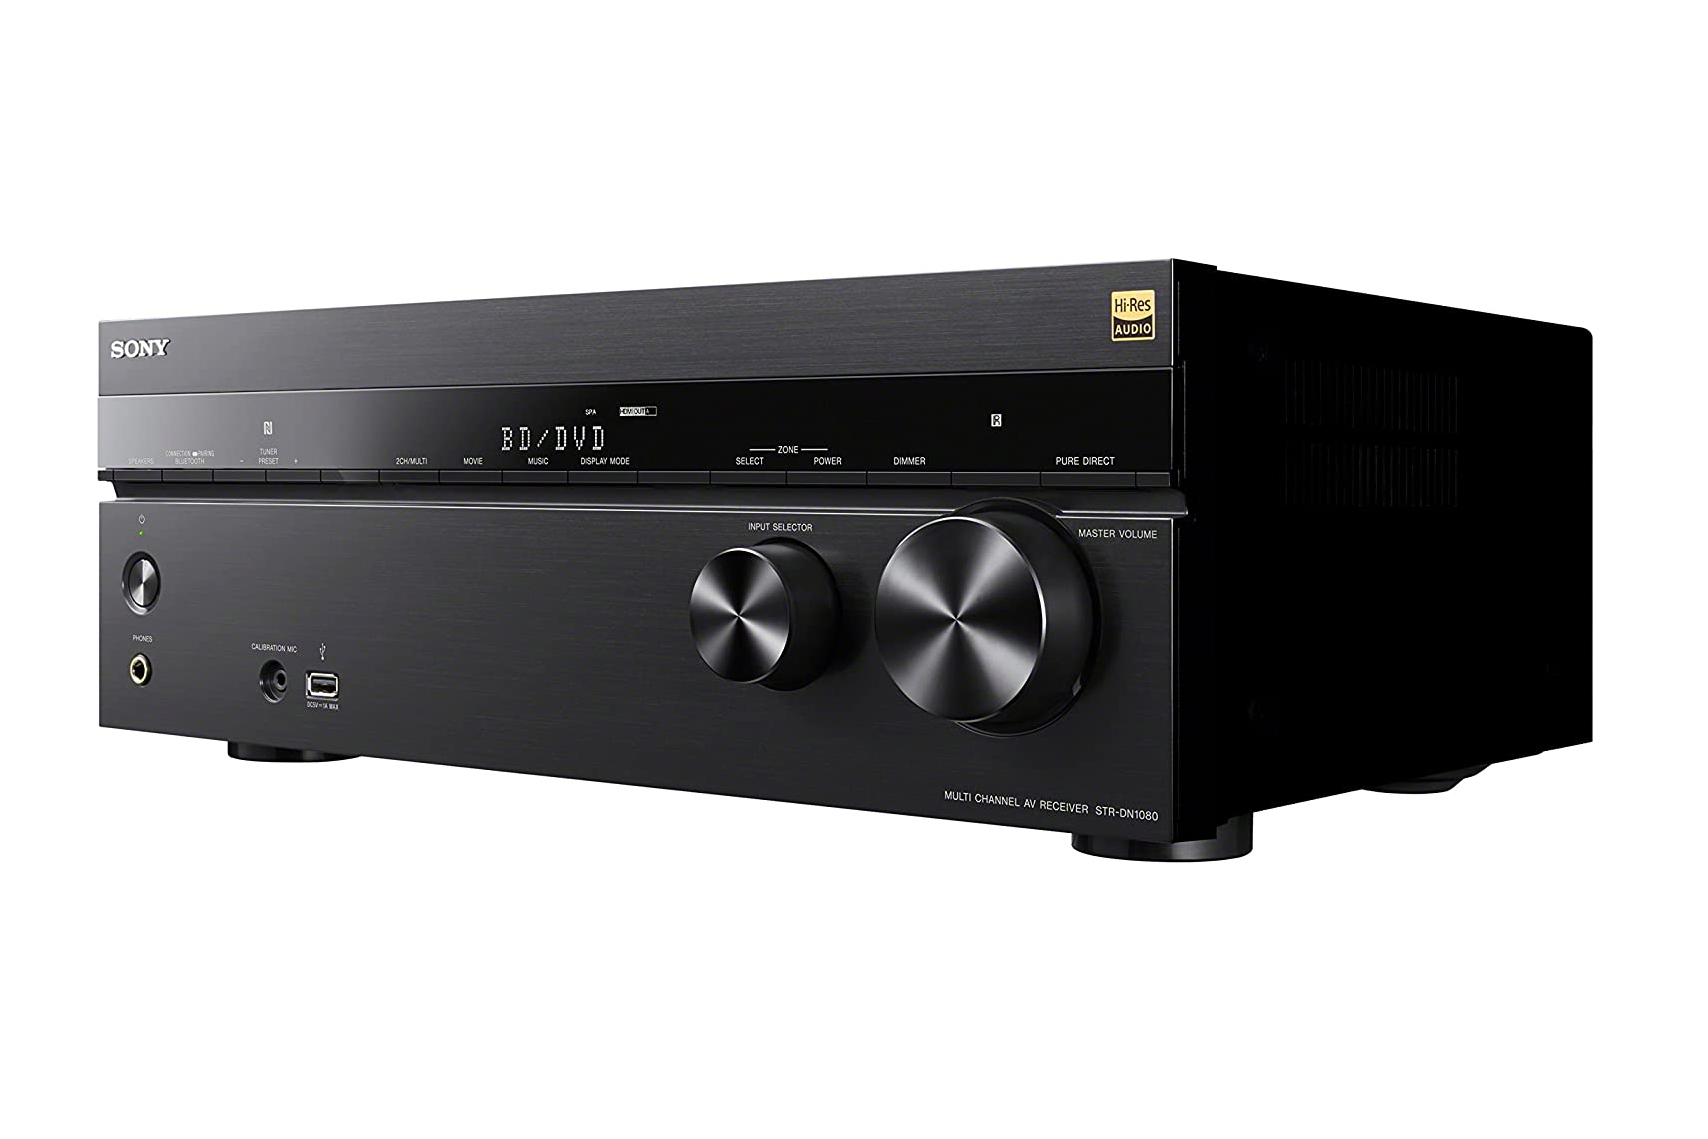 7 Best Home Theater Receivers Buyer’s Guide (2021)